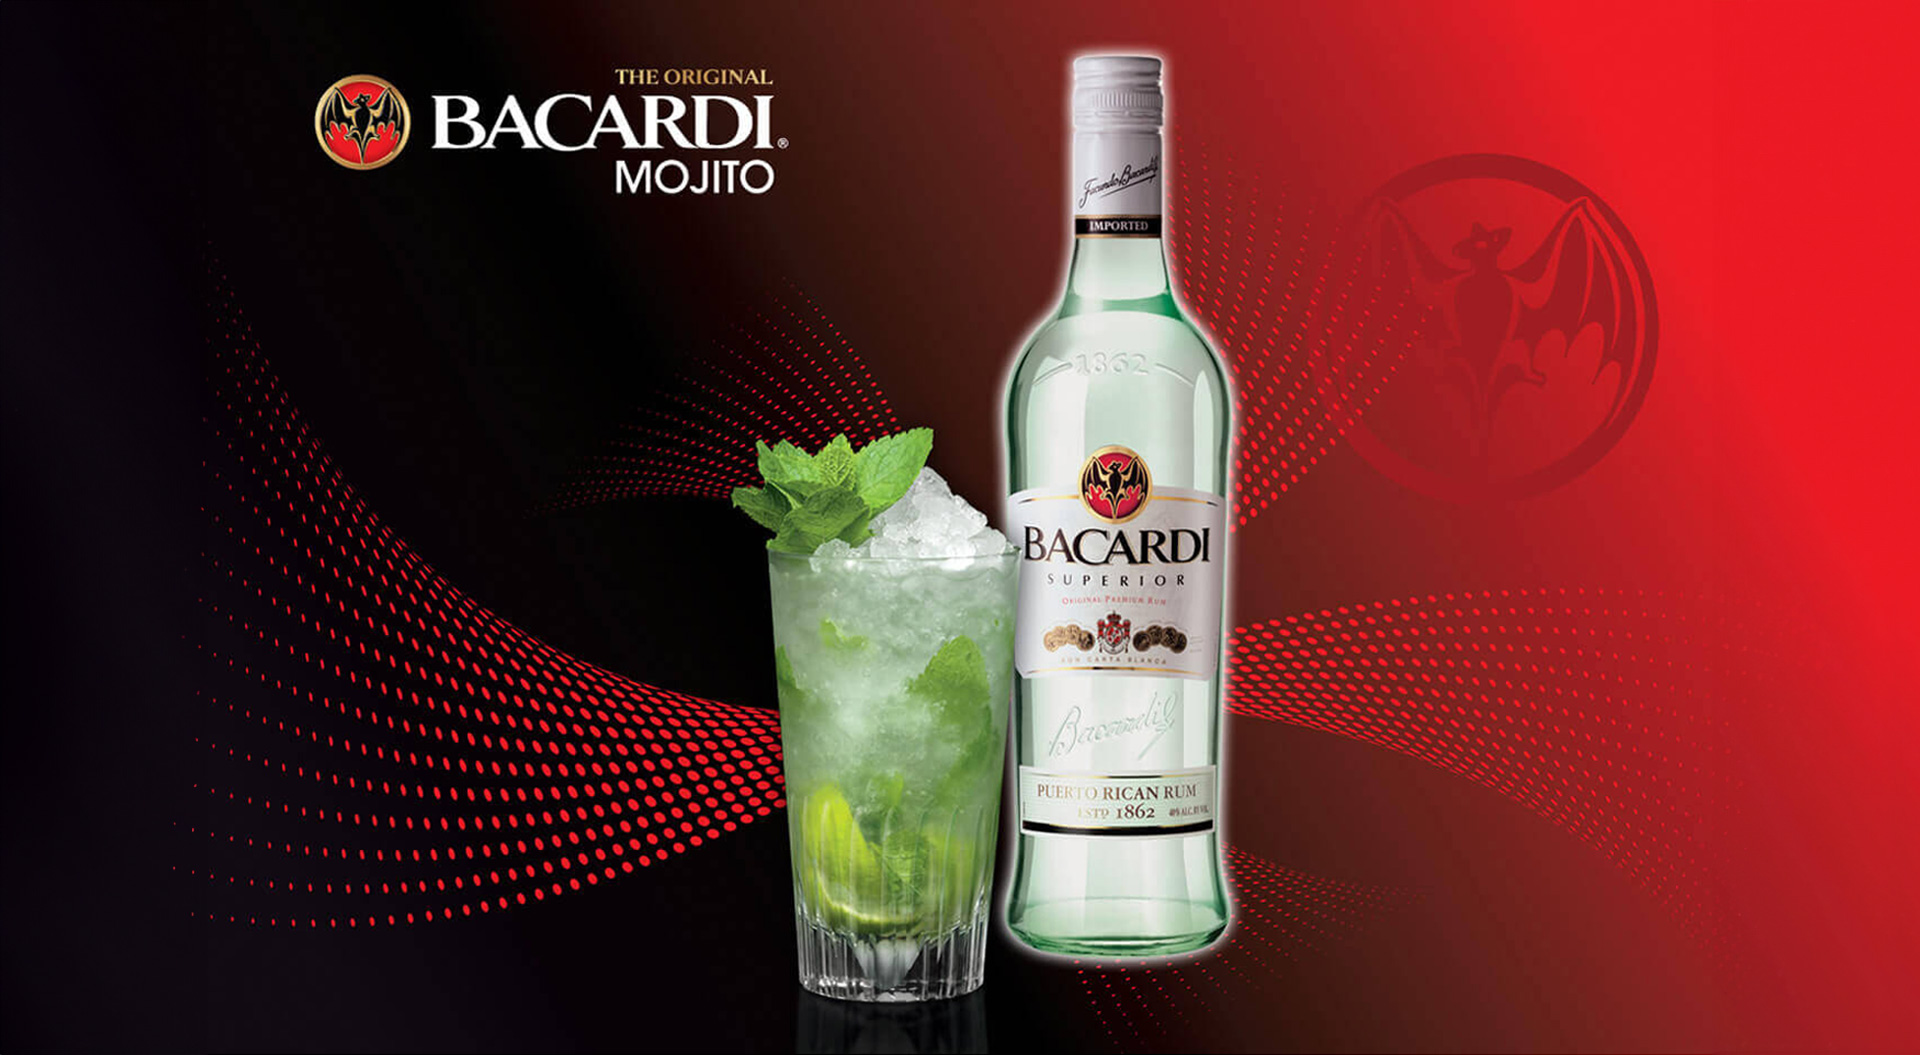 Bacardi Mojito Global Travel Retail, brand activation promotion campaigns